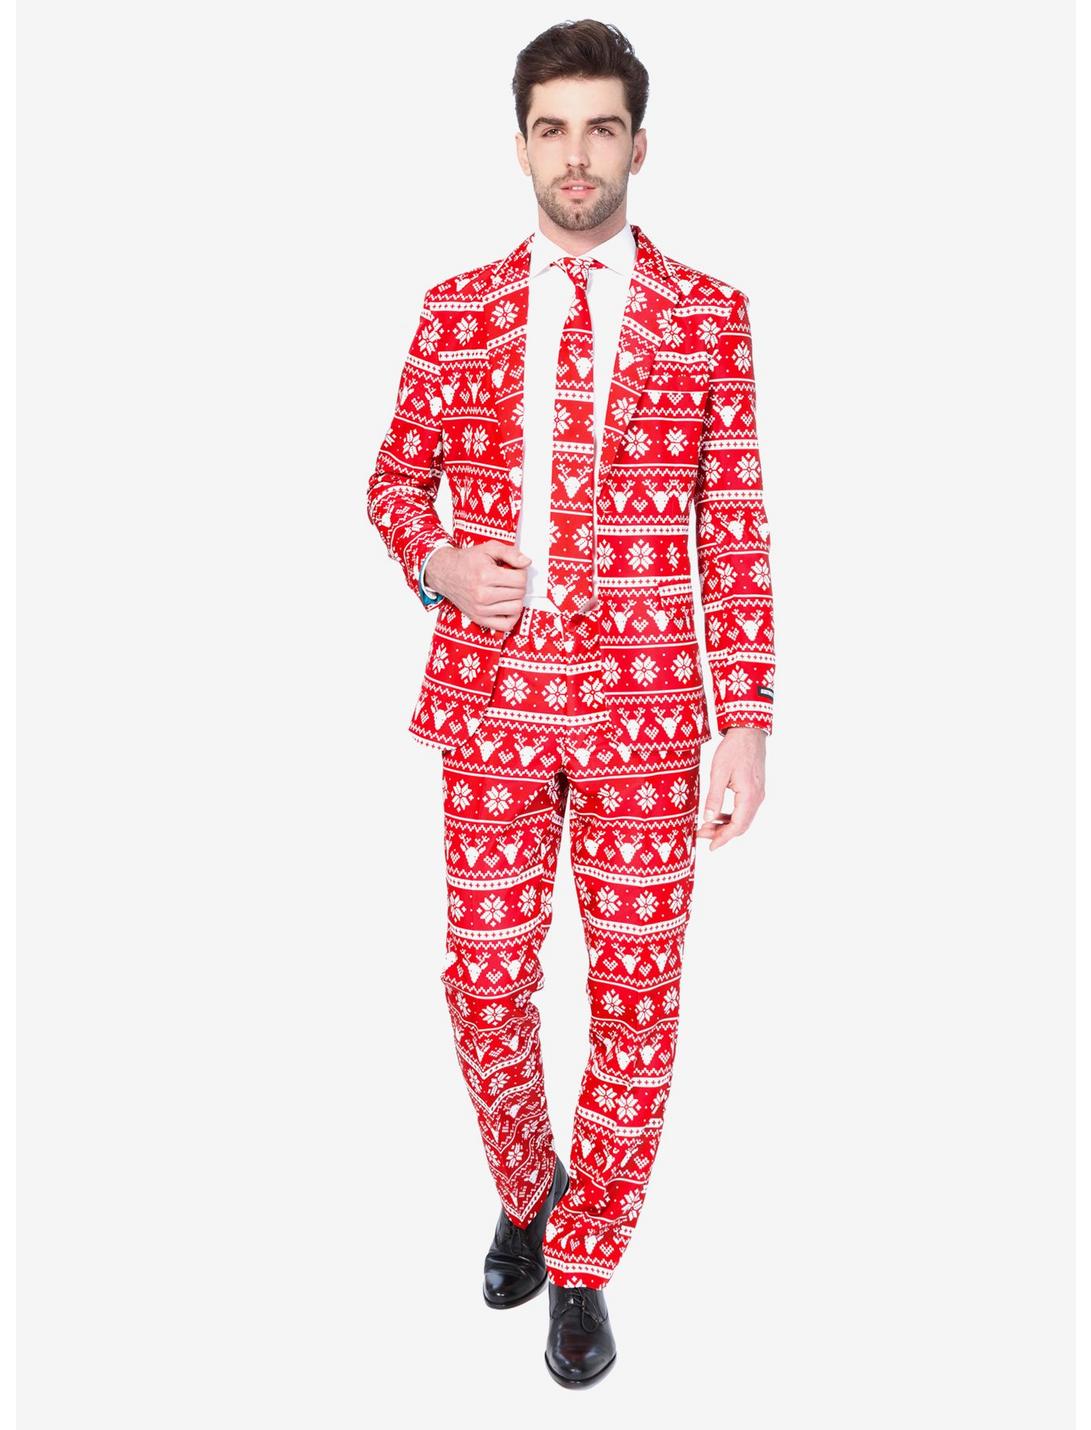 Suitmeister Men's Christmas Red Nordic Christmas Suit, RED  WHITE, hi-res